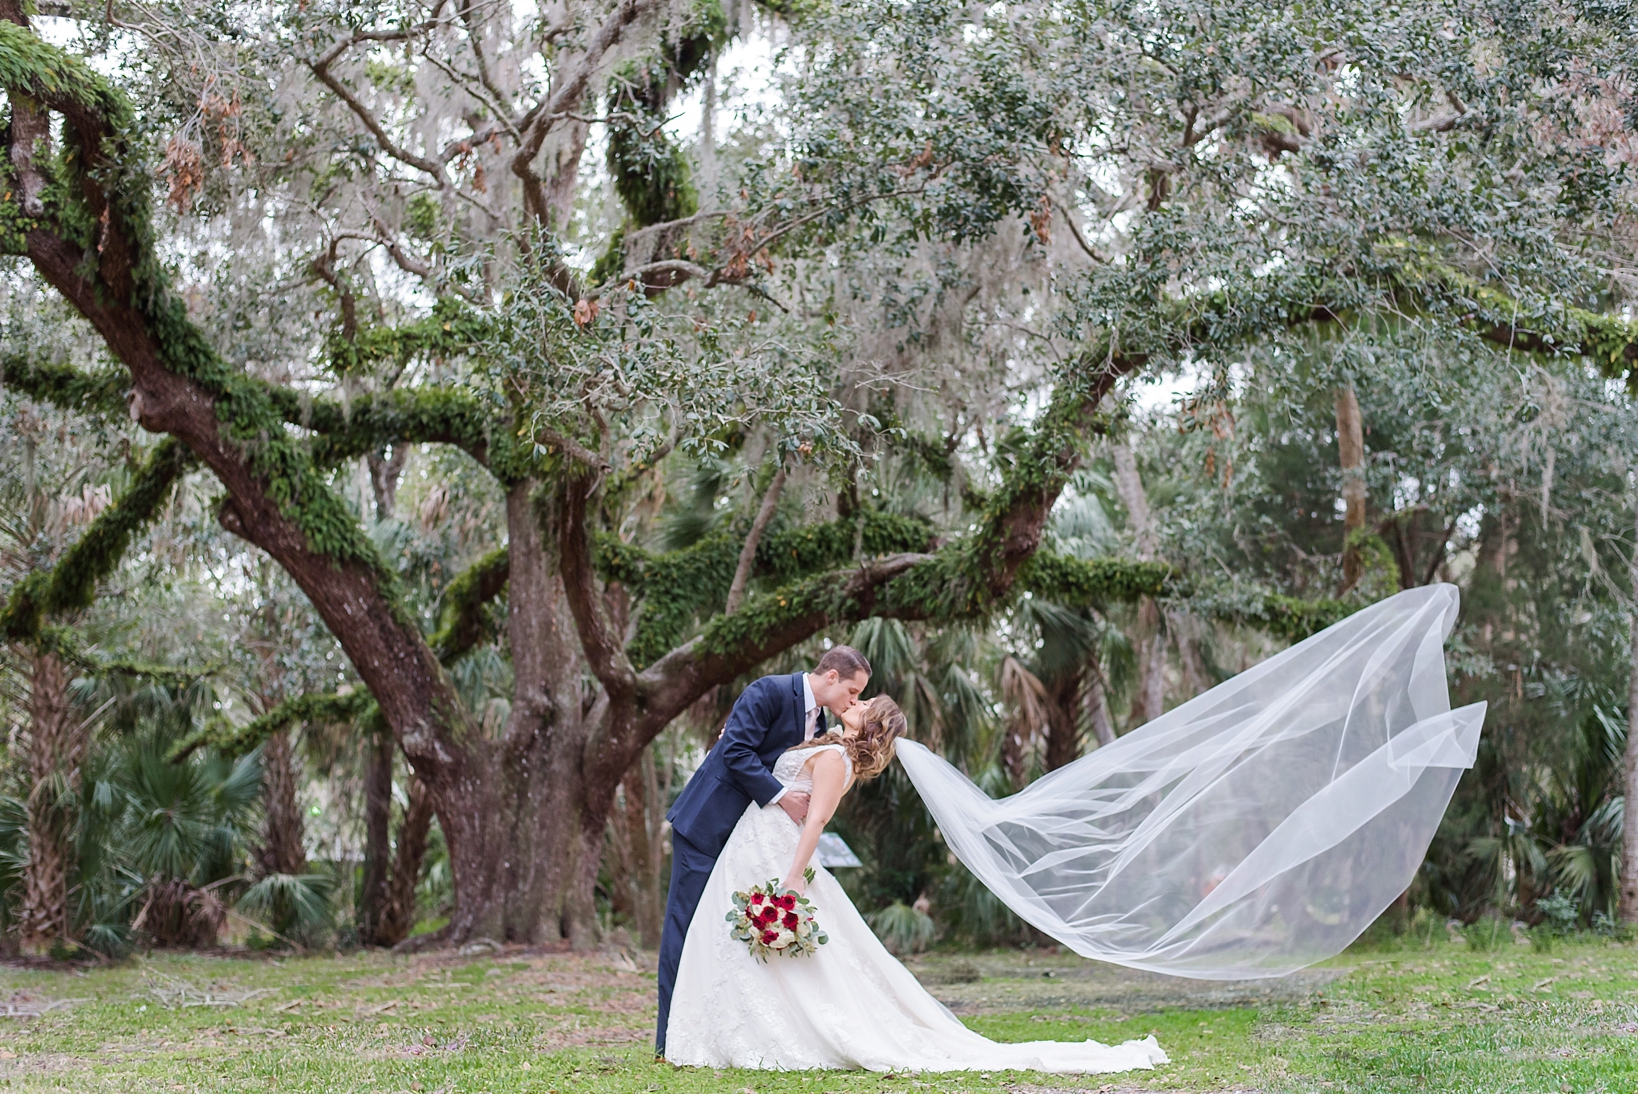 Epic shot of the wind catching the brides veil by Sarah & Ben Photography. Check out all our work at www.sarahben.com